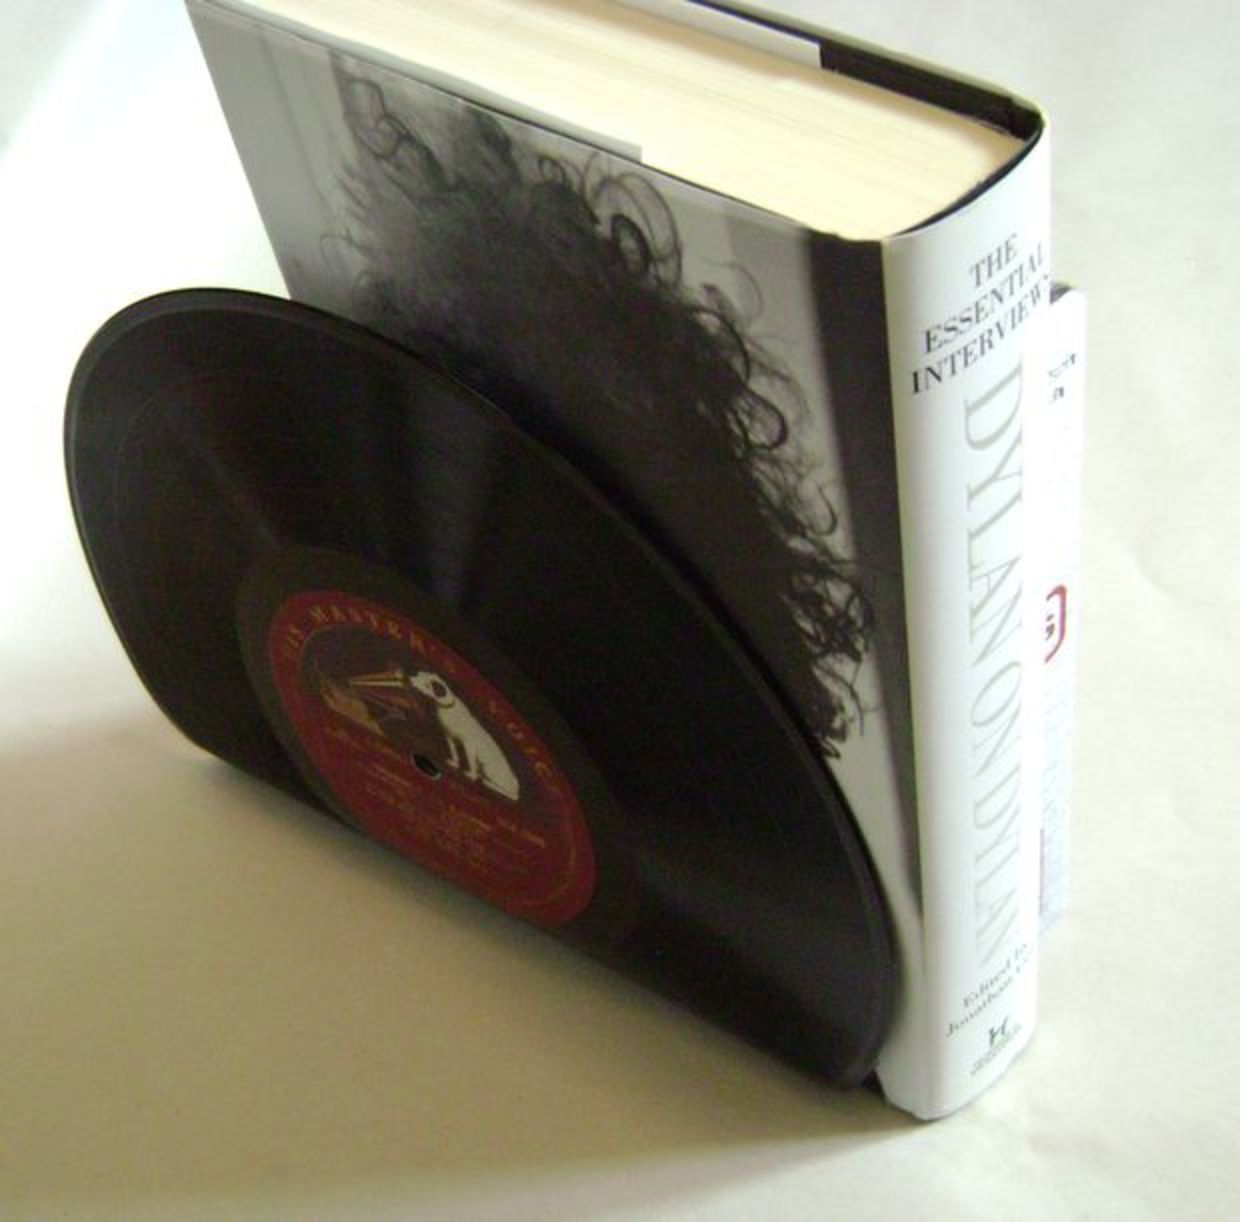 Upcycled bookends made from vinyl records are diy home decor ideas